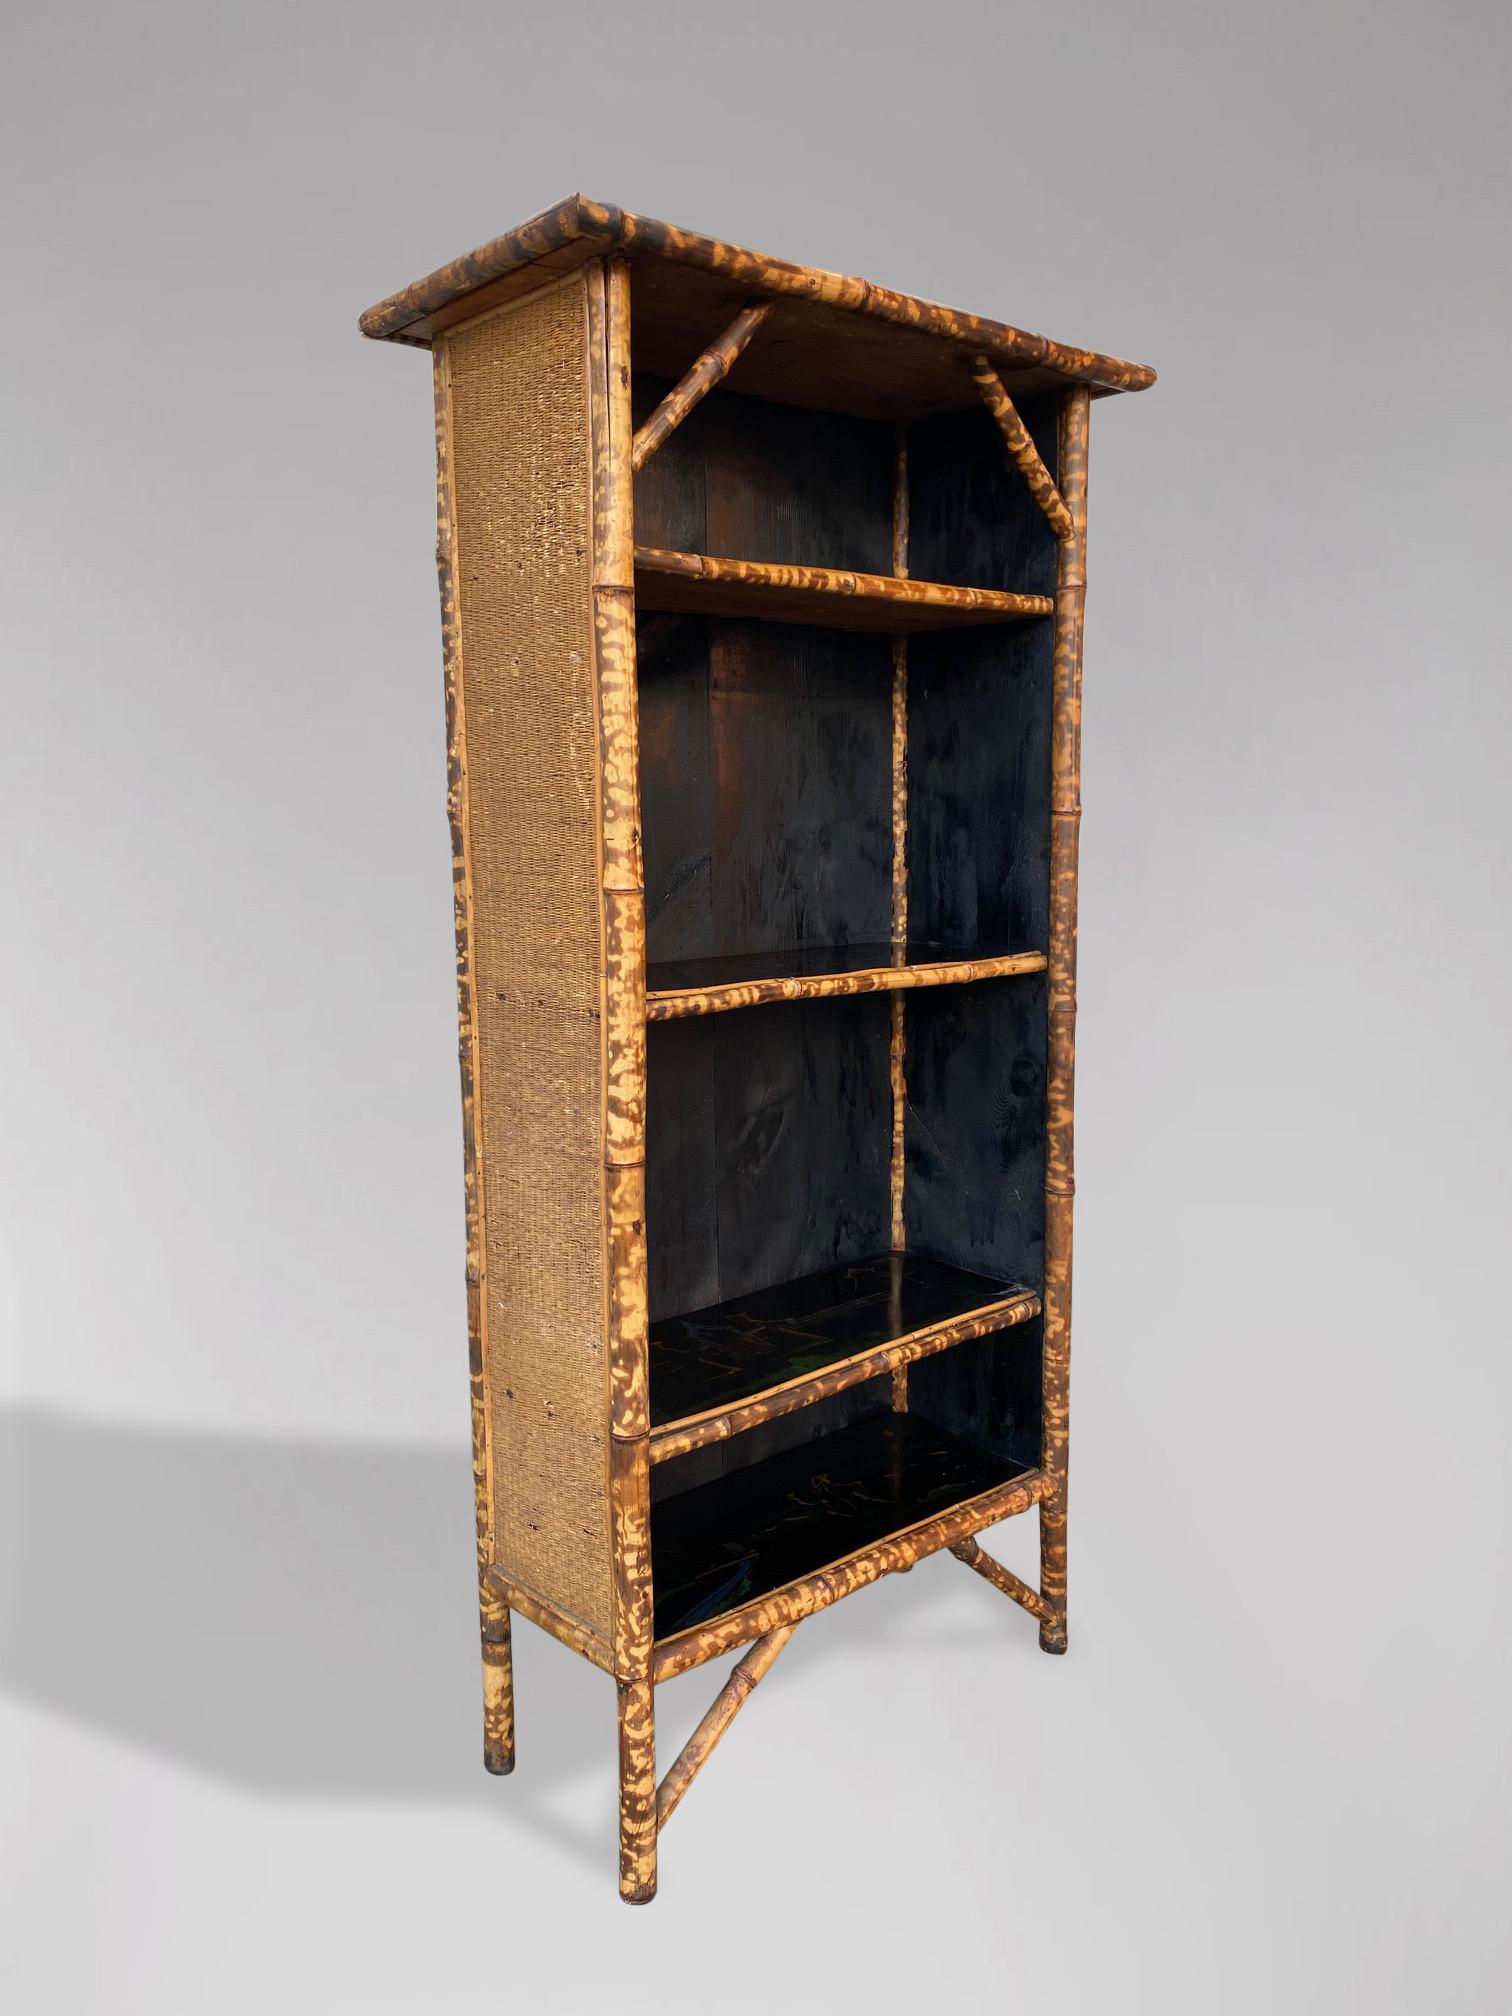 A very decorative 19th century, Anglo Japanese style tiger bamboo shelving cabinet. Rectangular top with three internal fixed shelves. This beautiful and unusual cabinet has lacquered and hand decorated painted designs to each shelf. Good condition